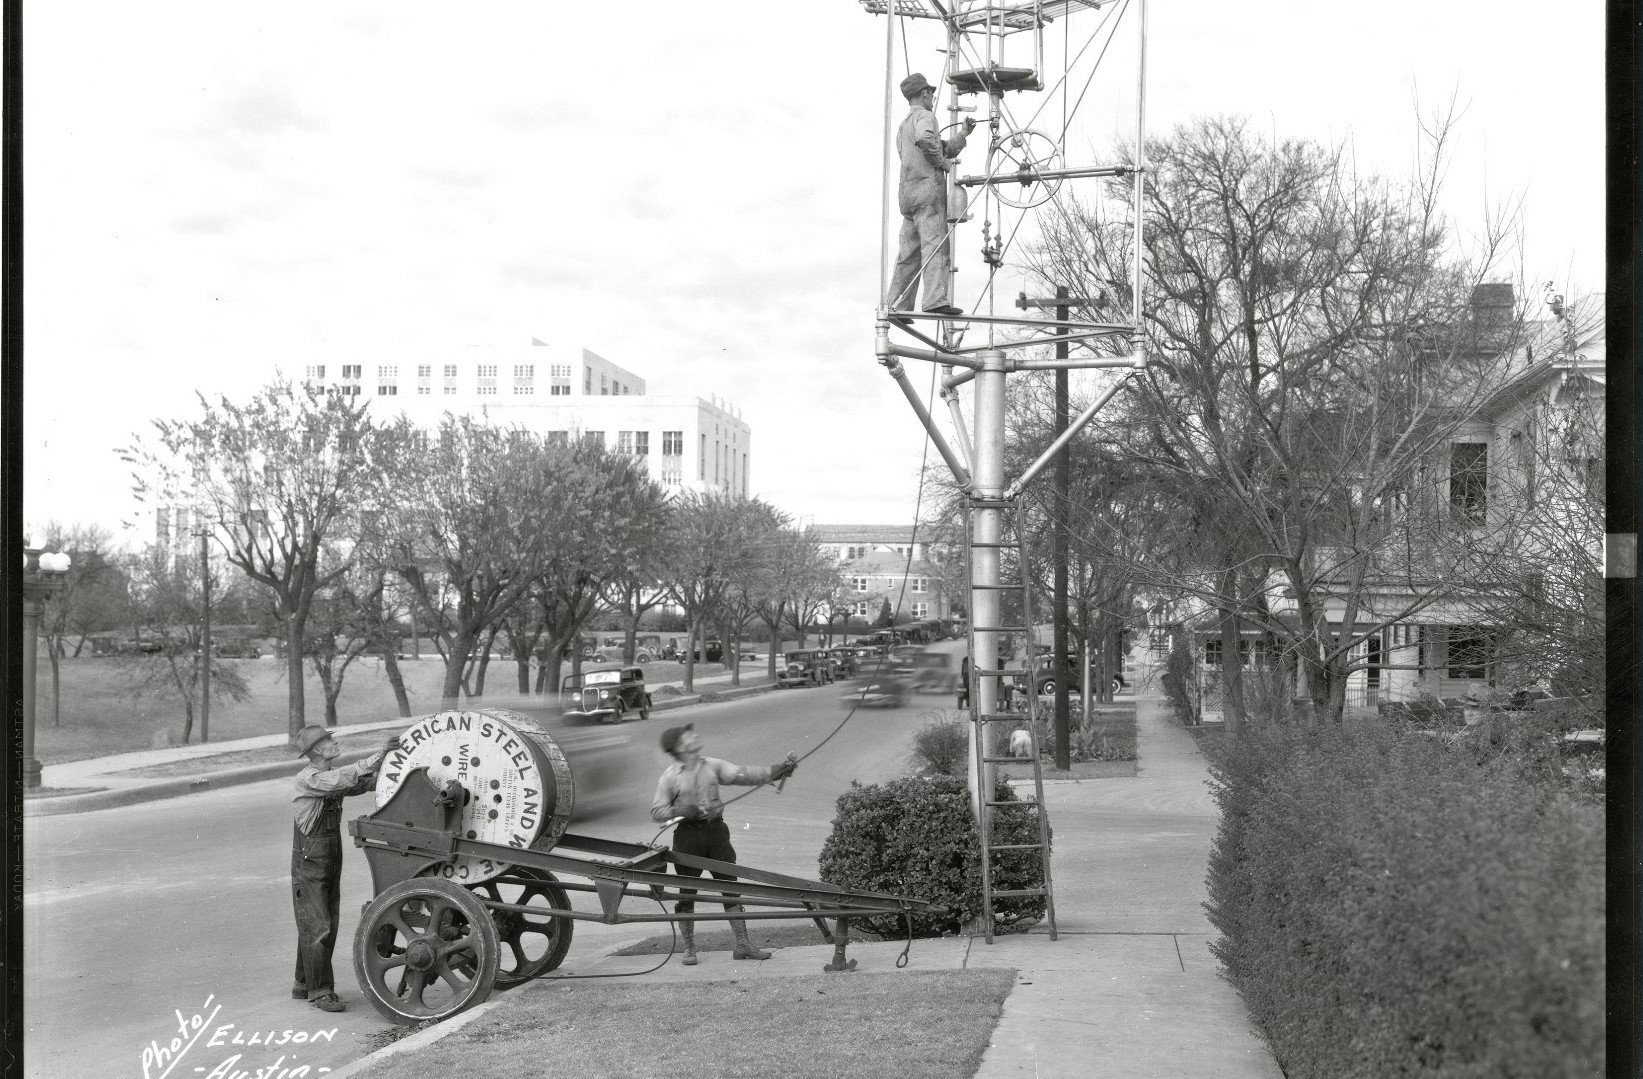 Repairs at Guadalupe and 9th St. in the 1930s